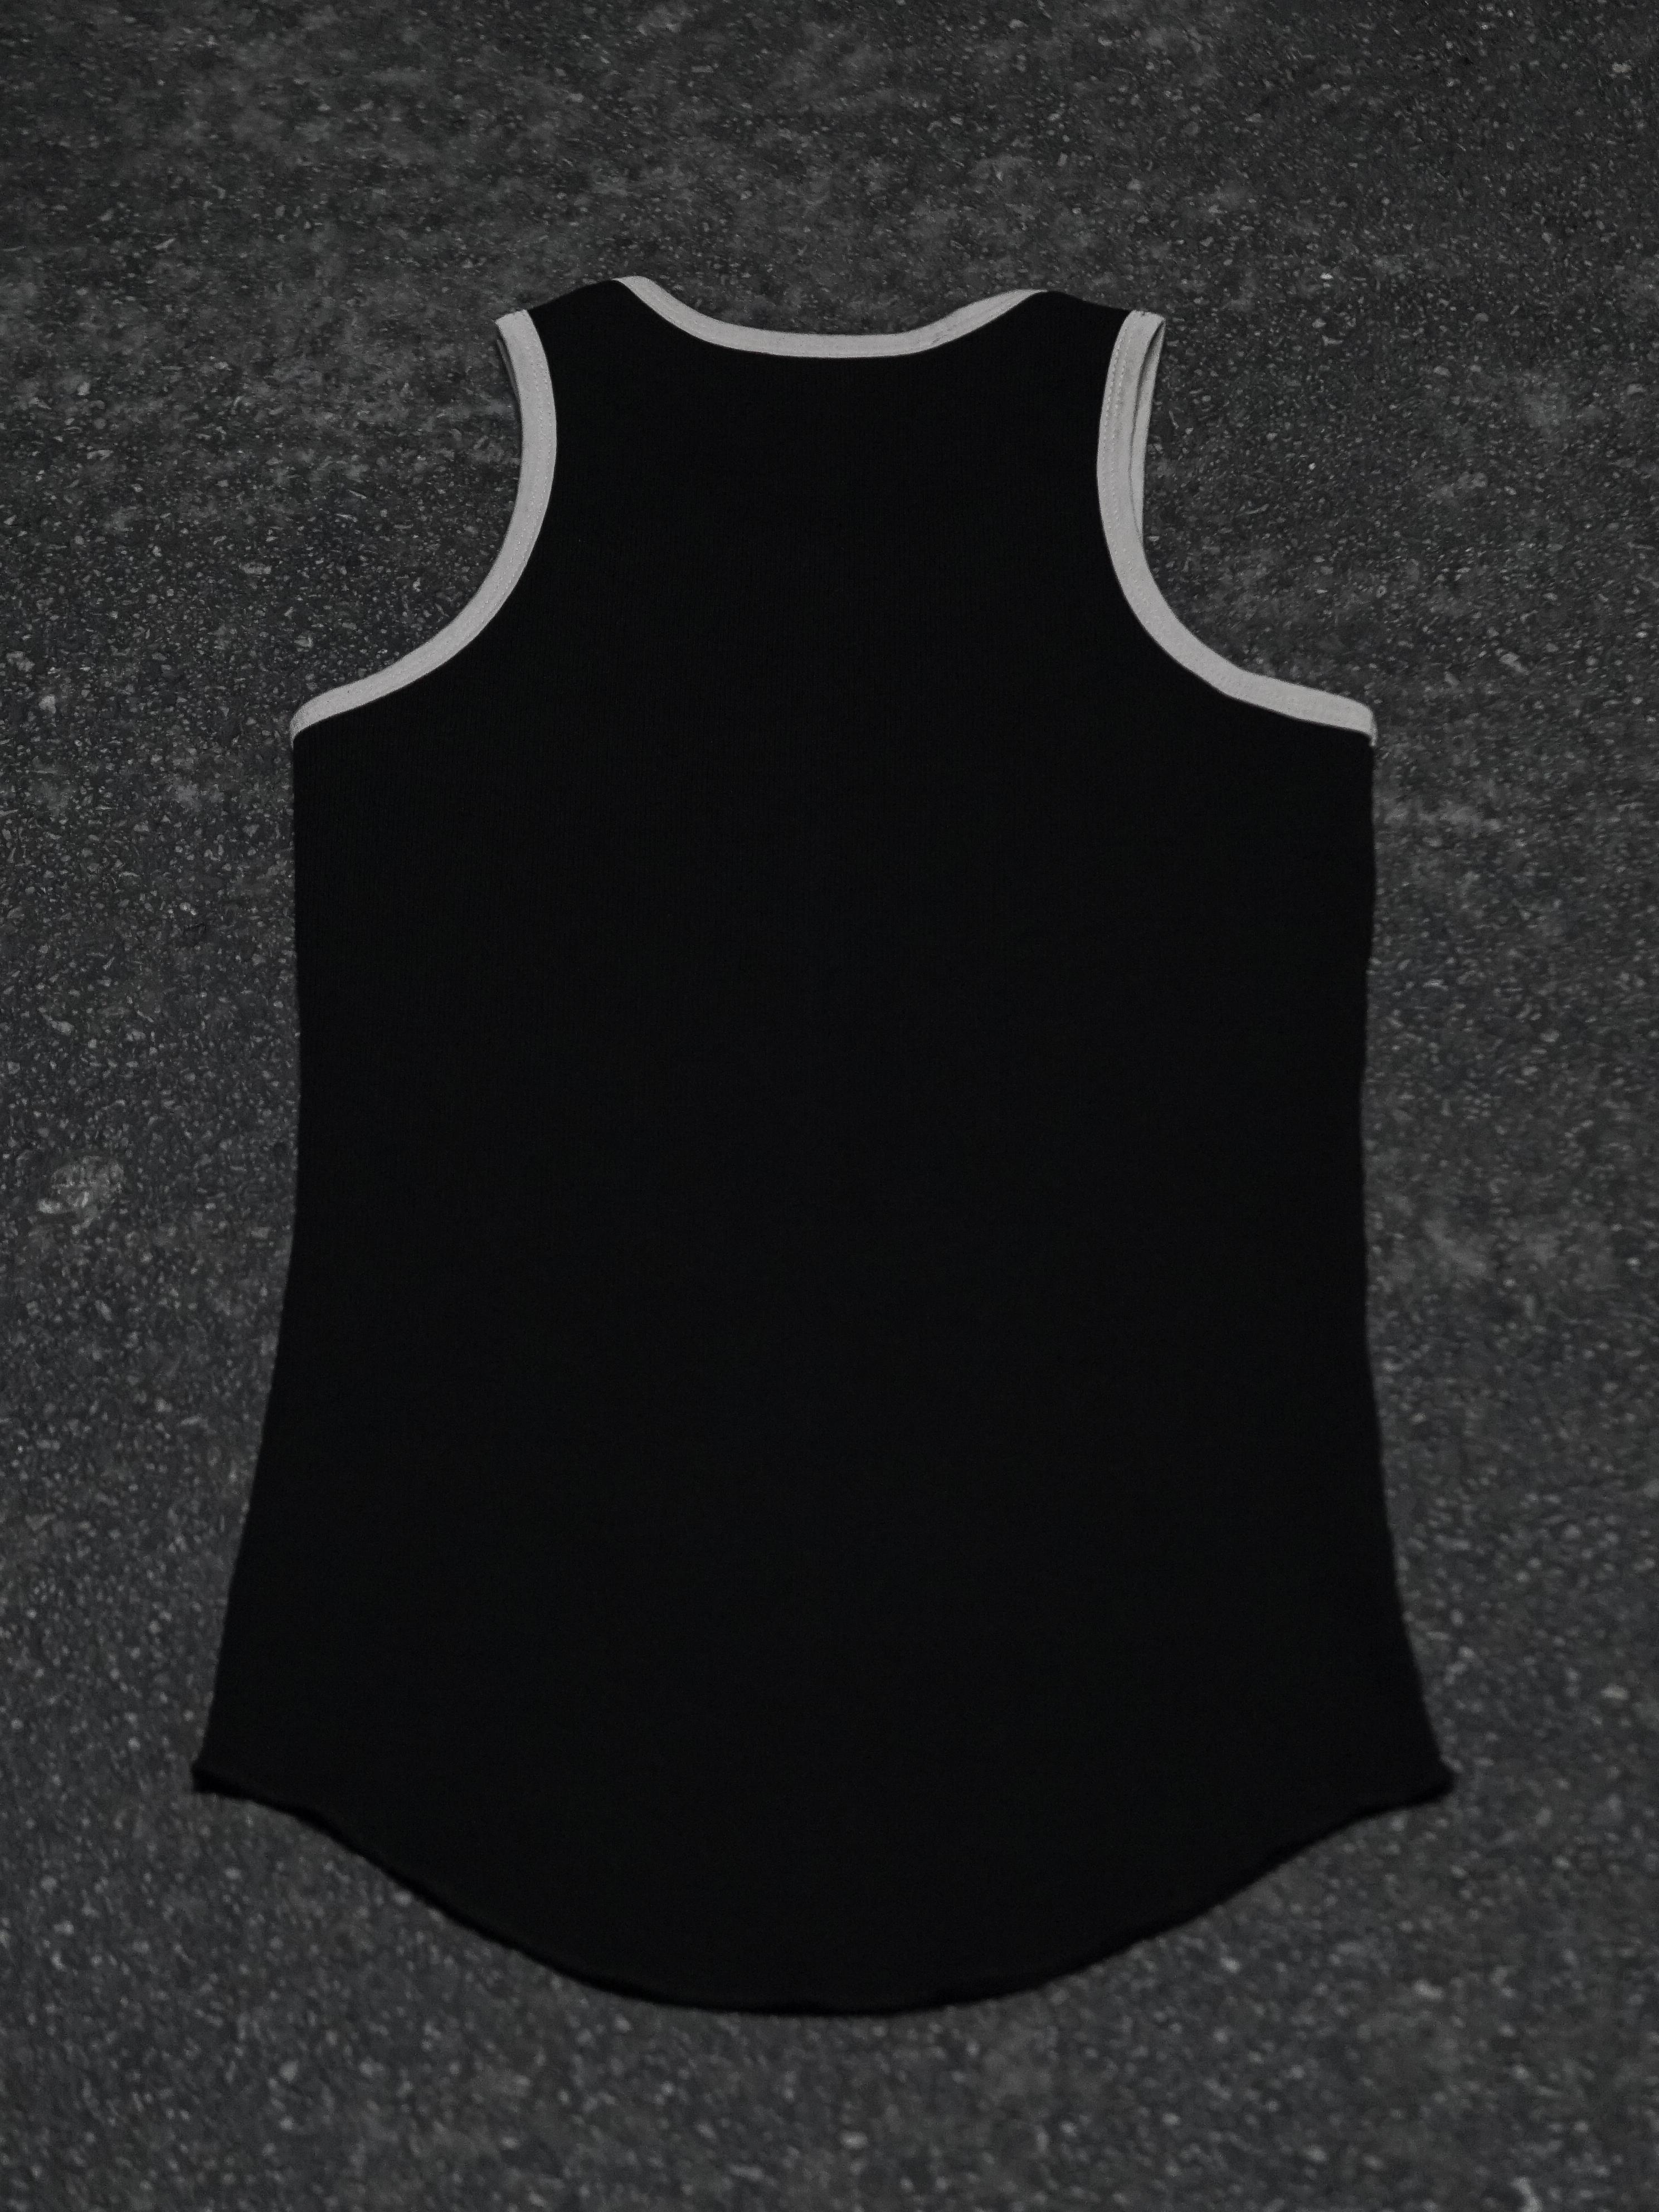 'theDAWG' Tank Top